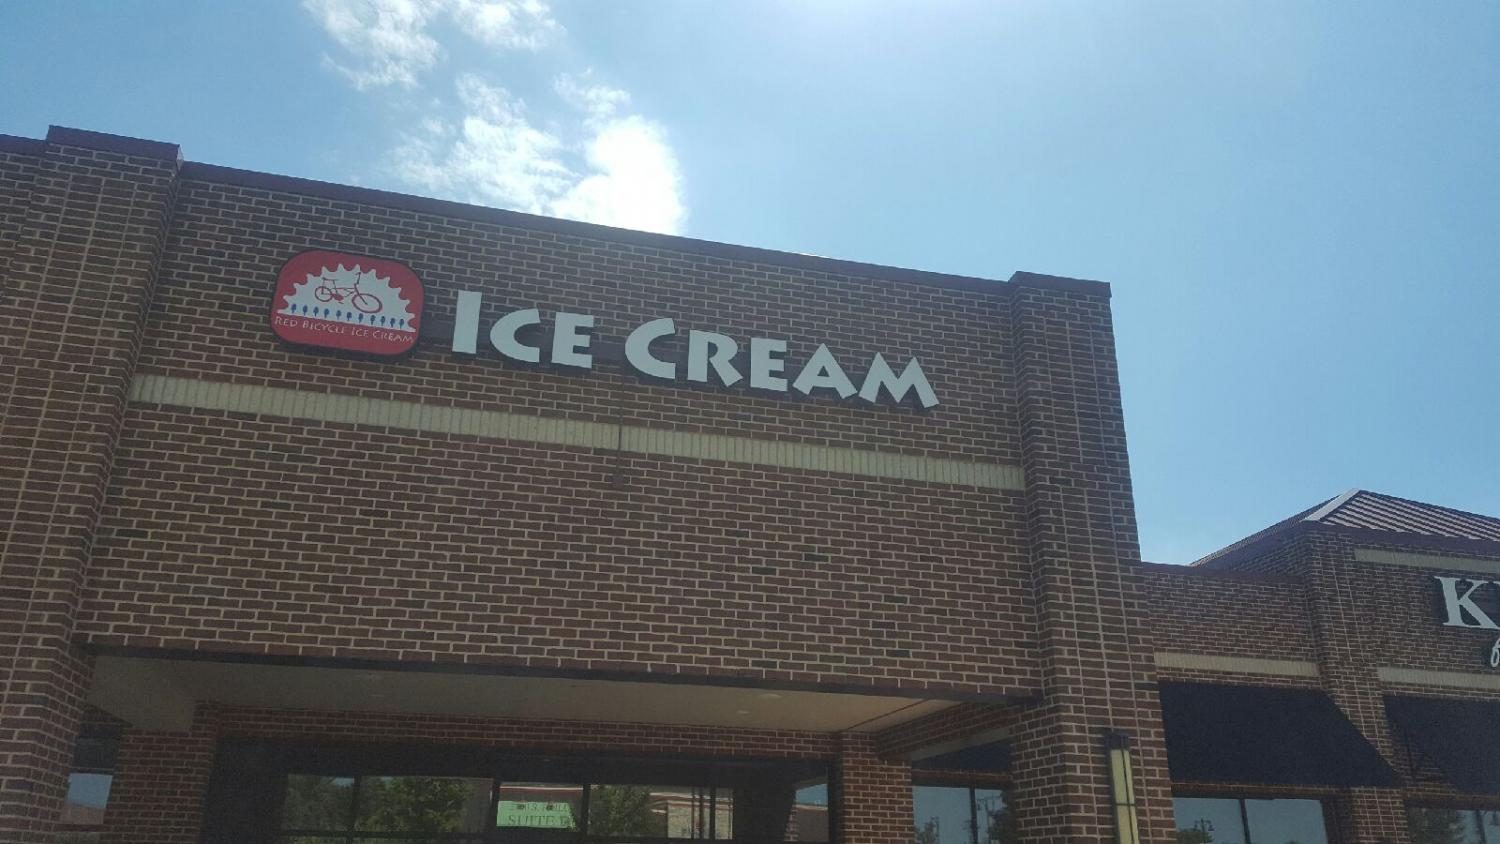 Red Bicycle Ice Cream opened in Urbana on Independence Day. Using cream from a local farm, locals will have over 16 ice cream flavors to choose from. 